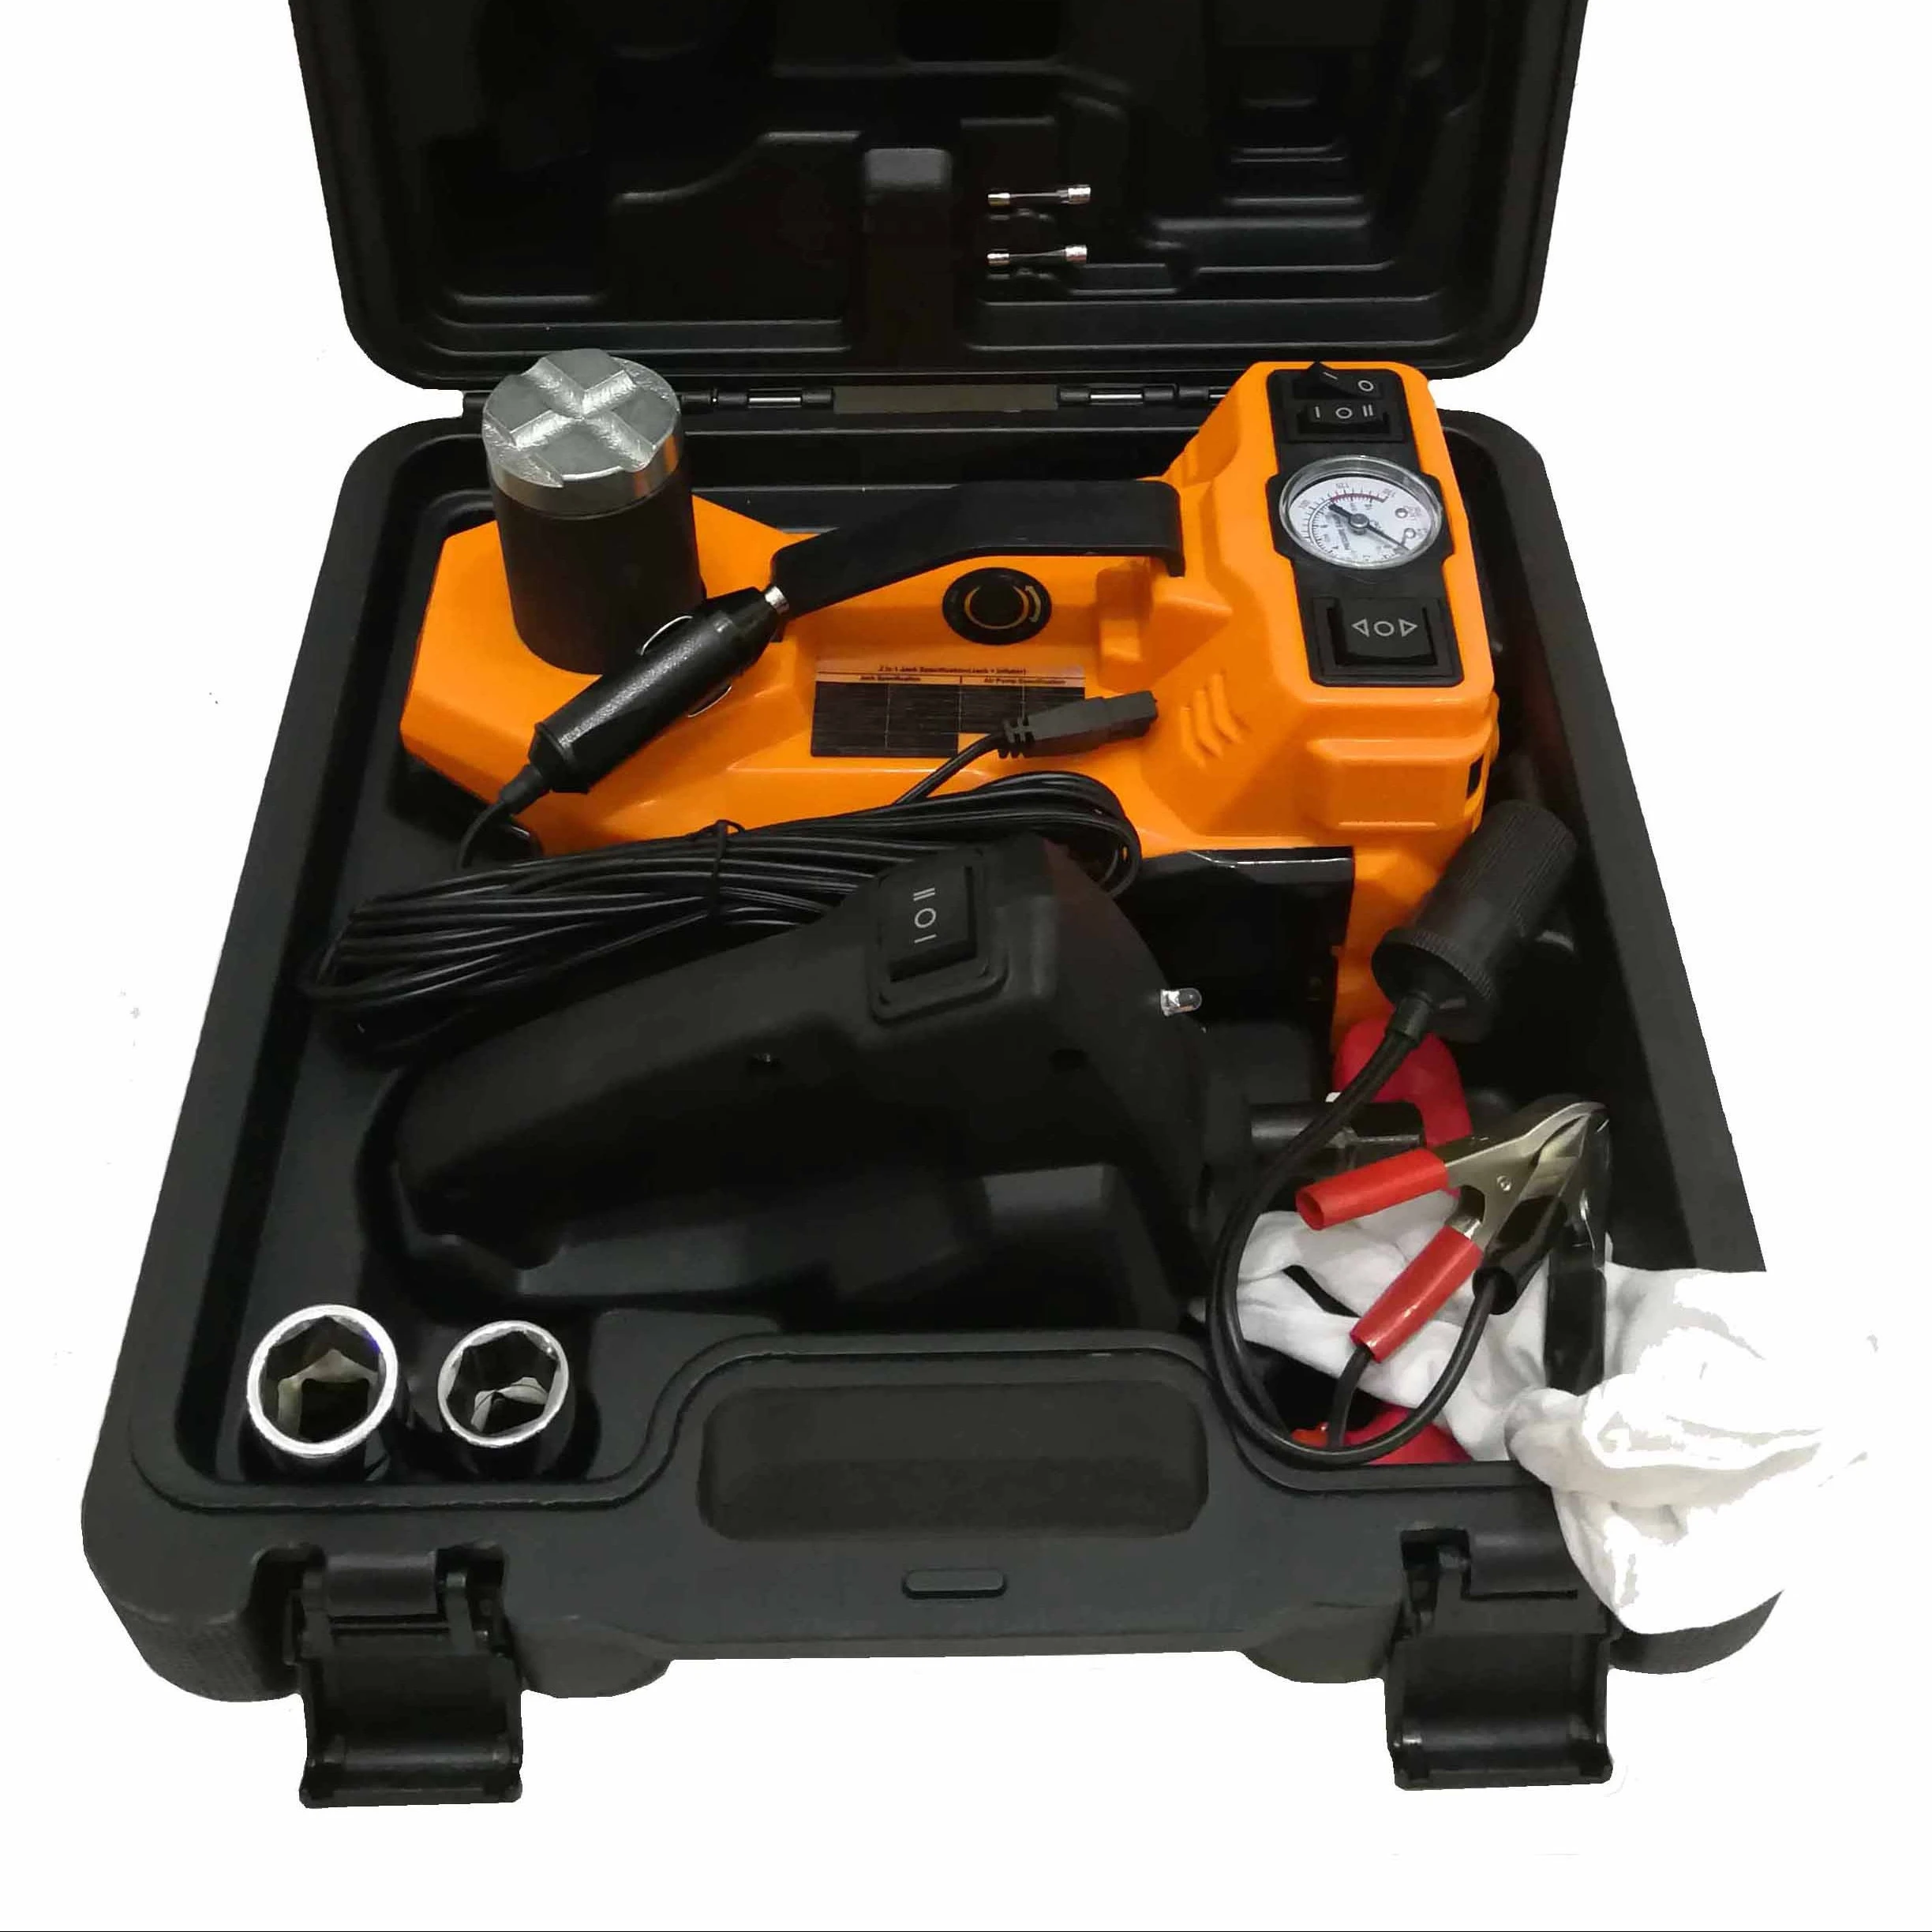 Excellent Quality 12V  ELECTRIC HYDRAULIC JACK  SUIT  AND IMPACT WRENCH